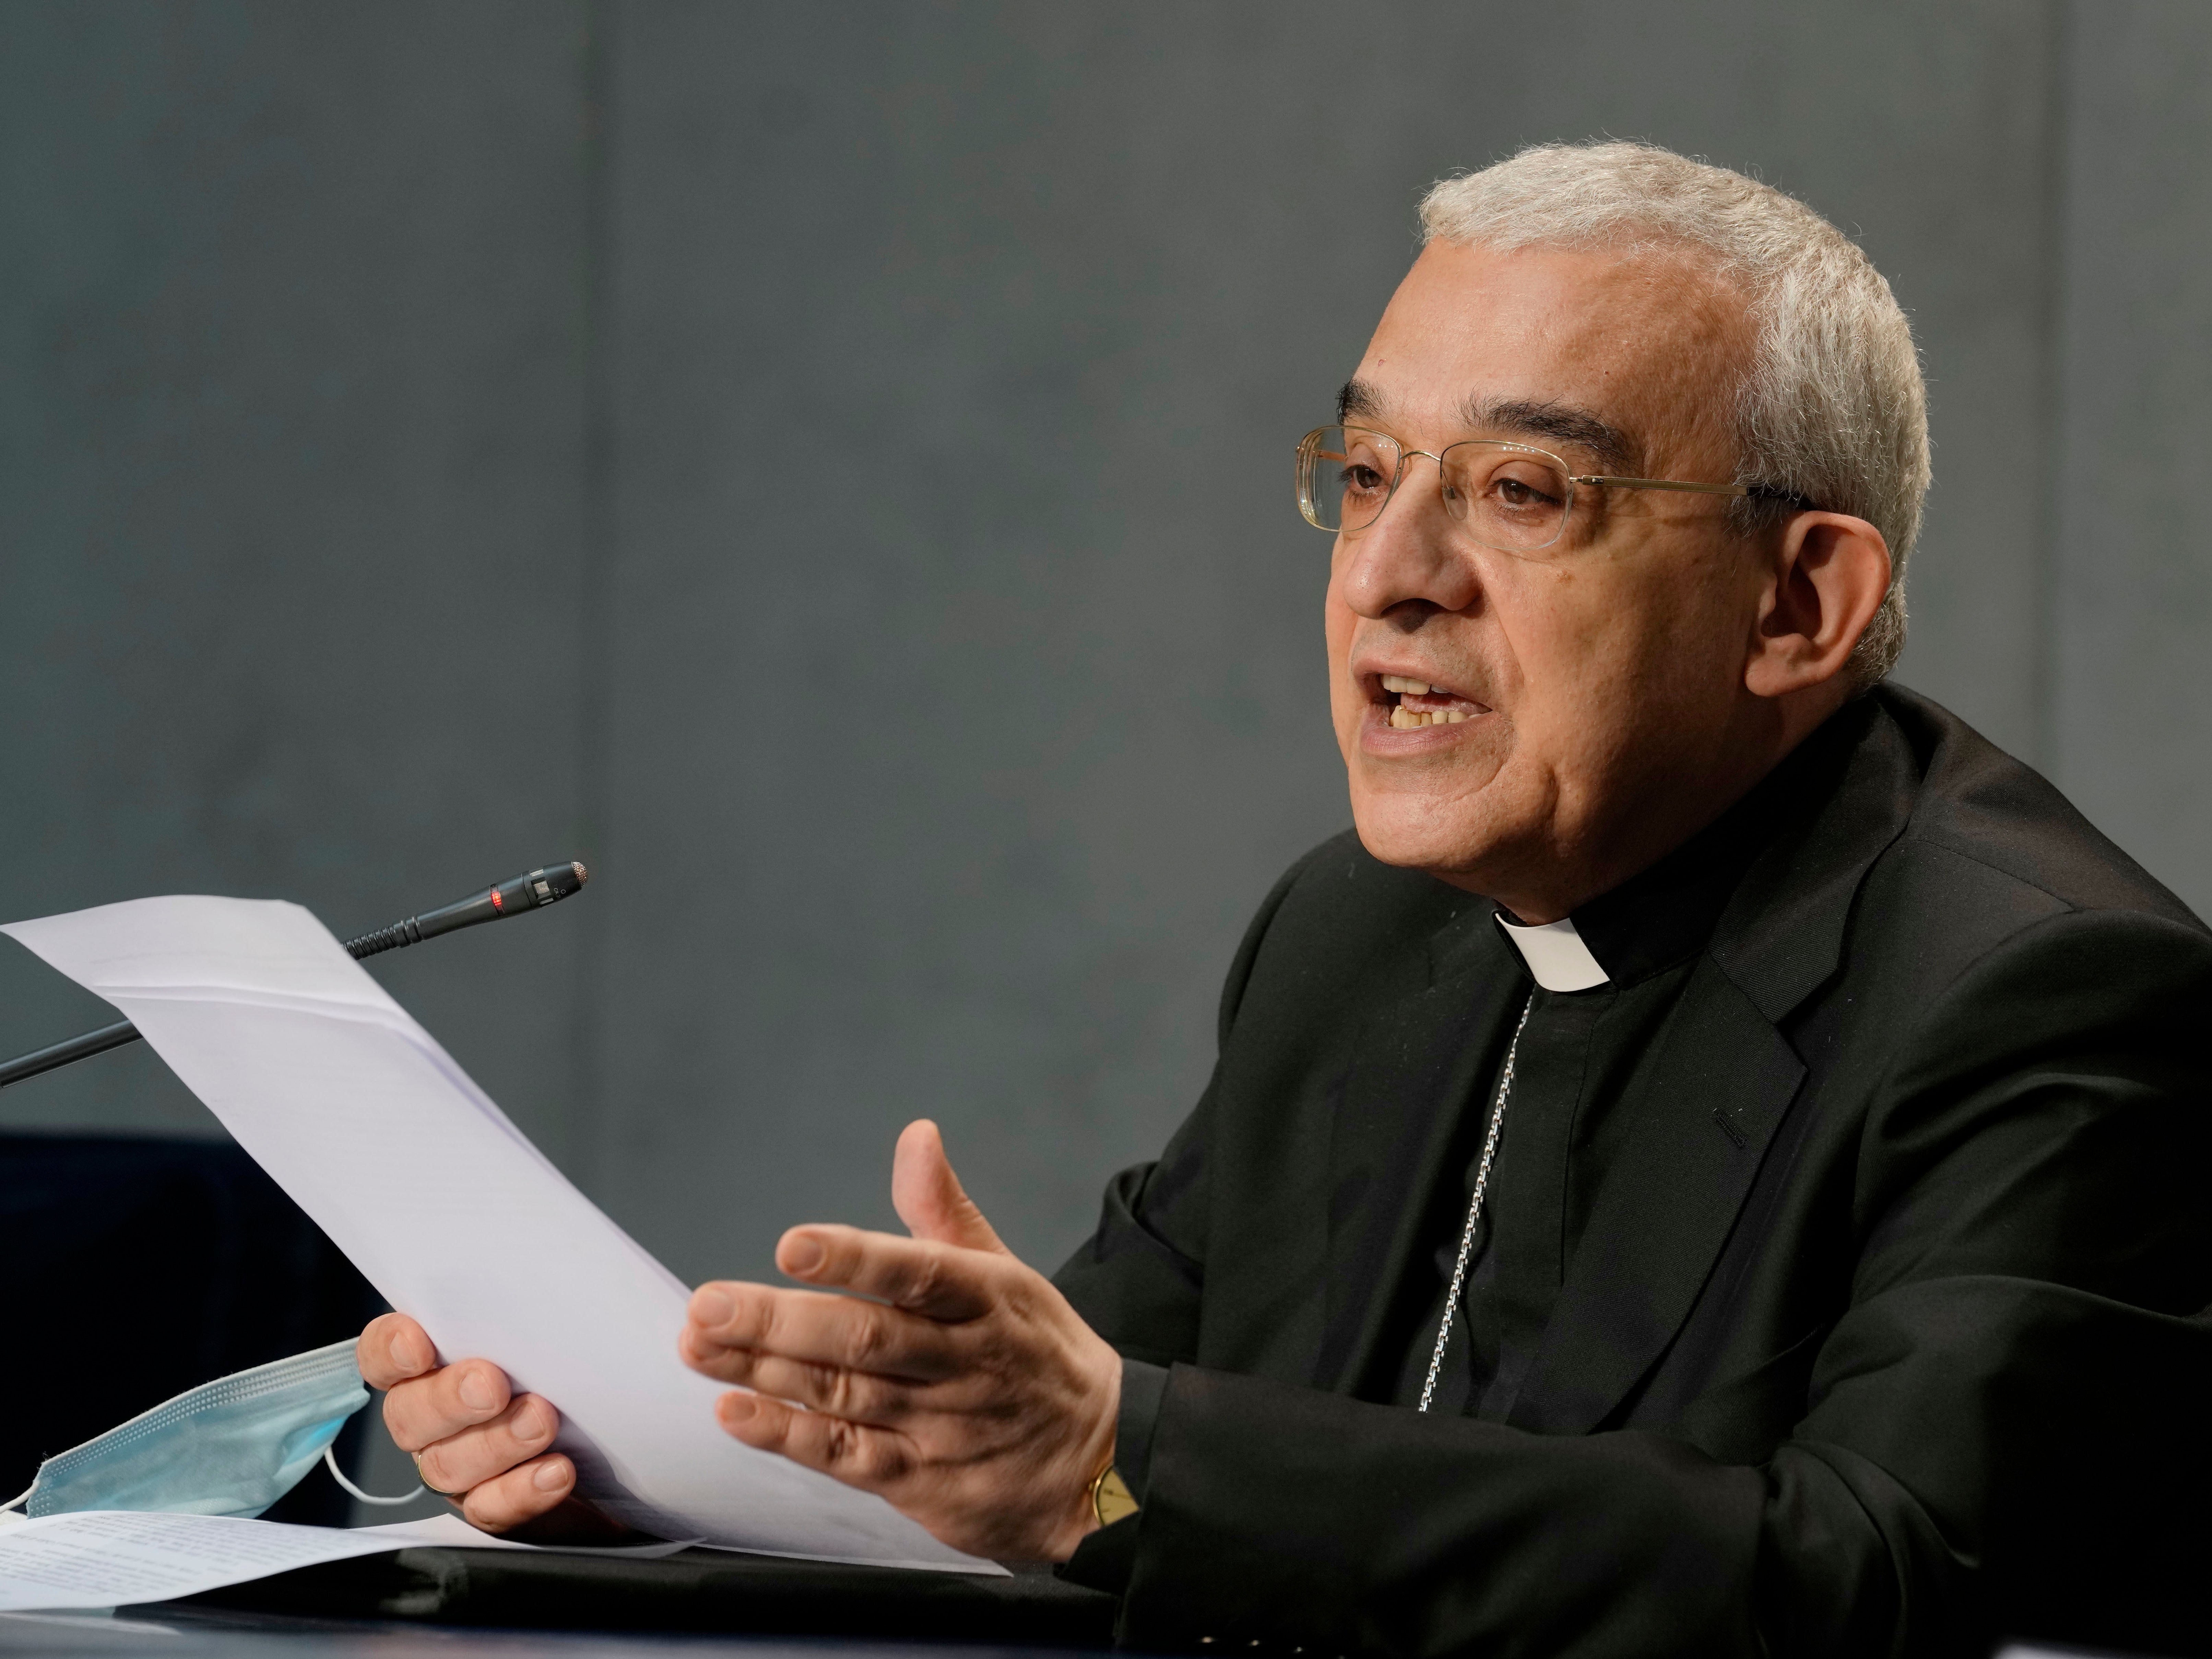 Vatican official Filippo Iannone has criticised the “climate of excessive slack” in prosecuting sexual abuse in the Catholic Church